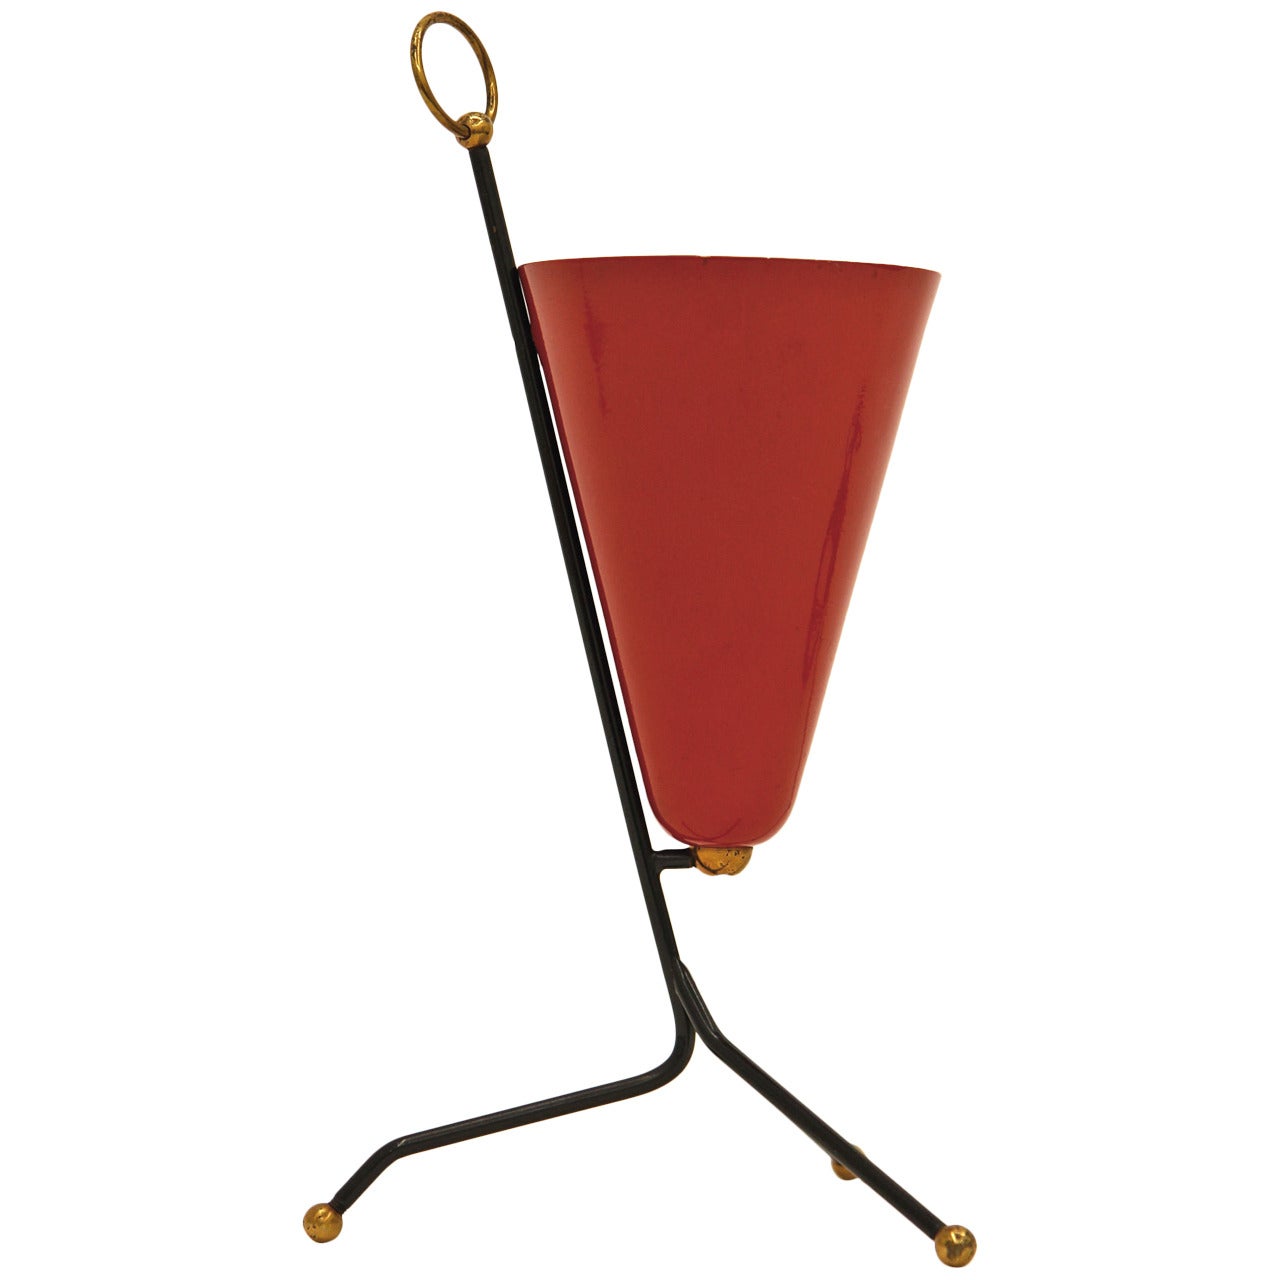 Cute Italian table lamp from the 1950s with a red lacquered cone shade mounted on a black lacquered tripod structure with brass details. At the top of this up light table lamp is a finial in the form of a brass ring. Very nice original condition